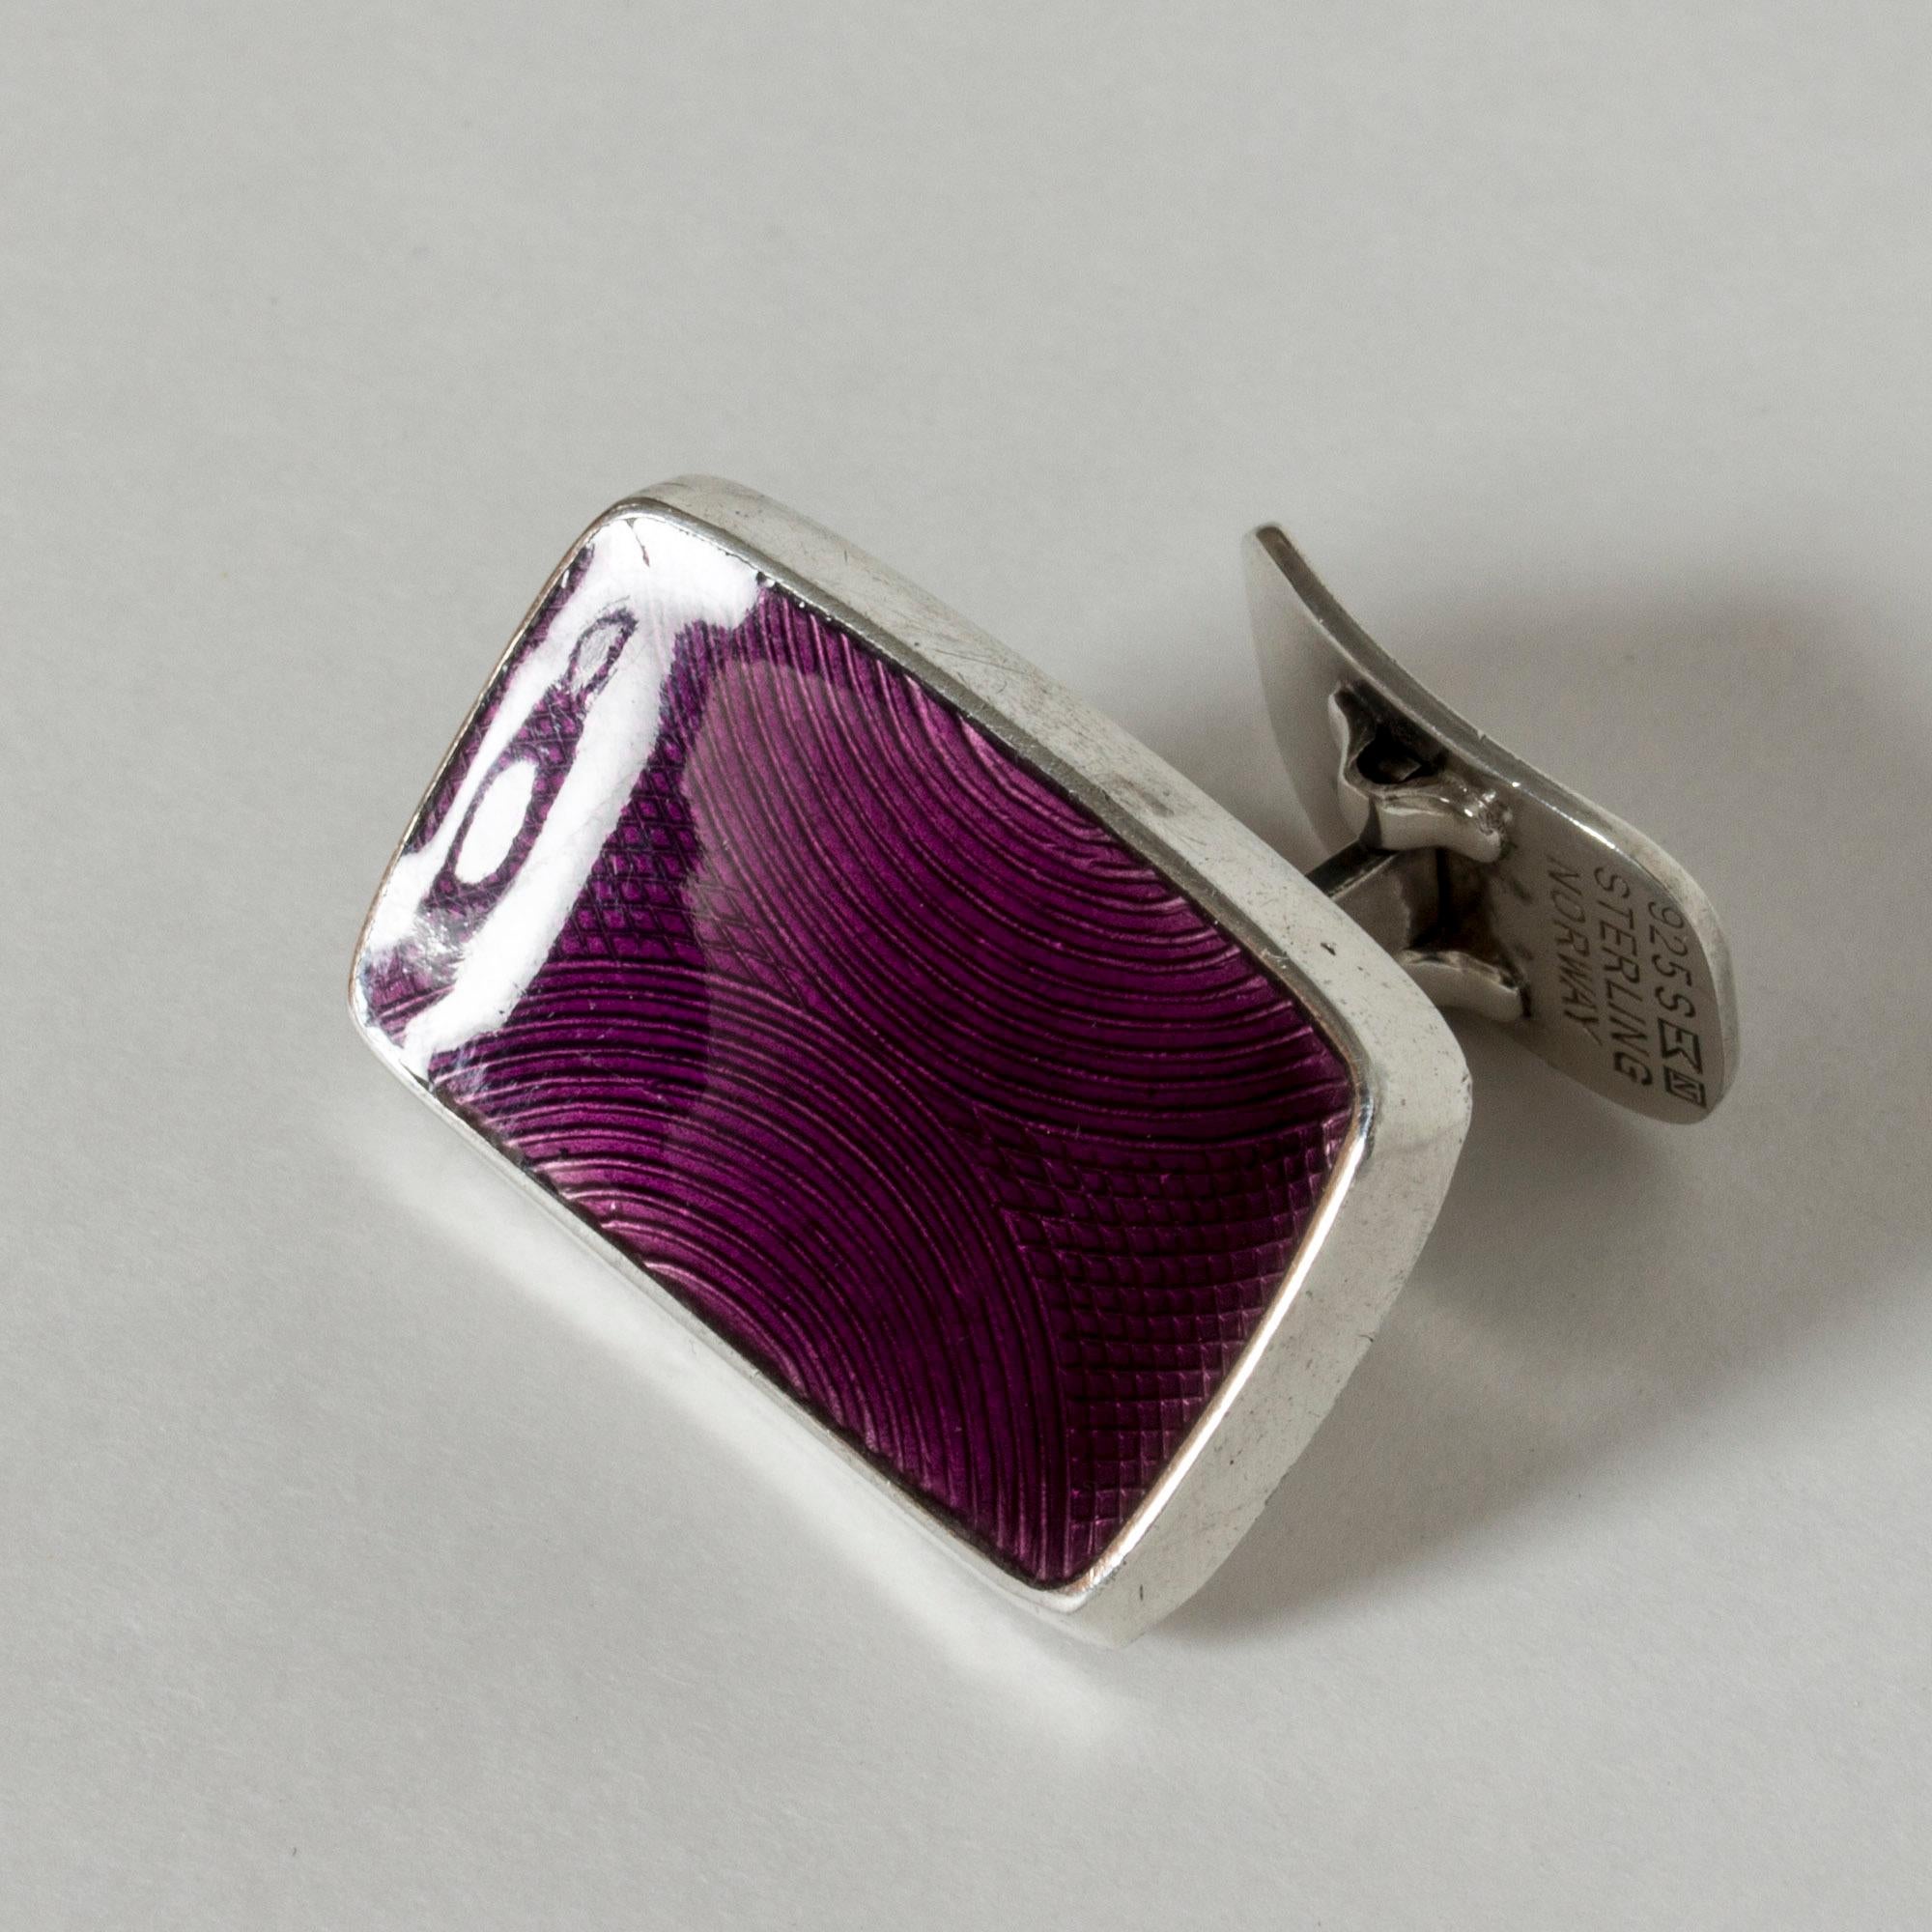 Pair of oversized silver cufflinks in a clean design by Einar Modahl. Decorated with rich purple enamel with a subtle, fingerprint-like graphic pattern that adds a tactile look.